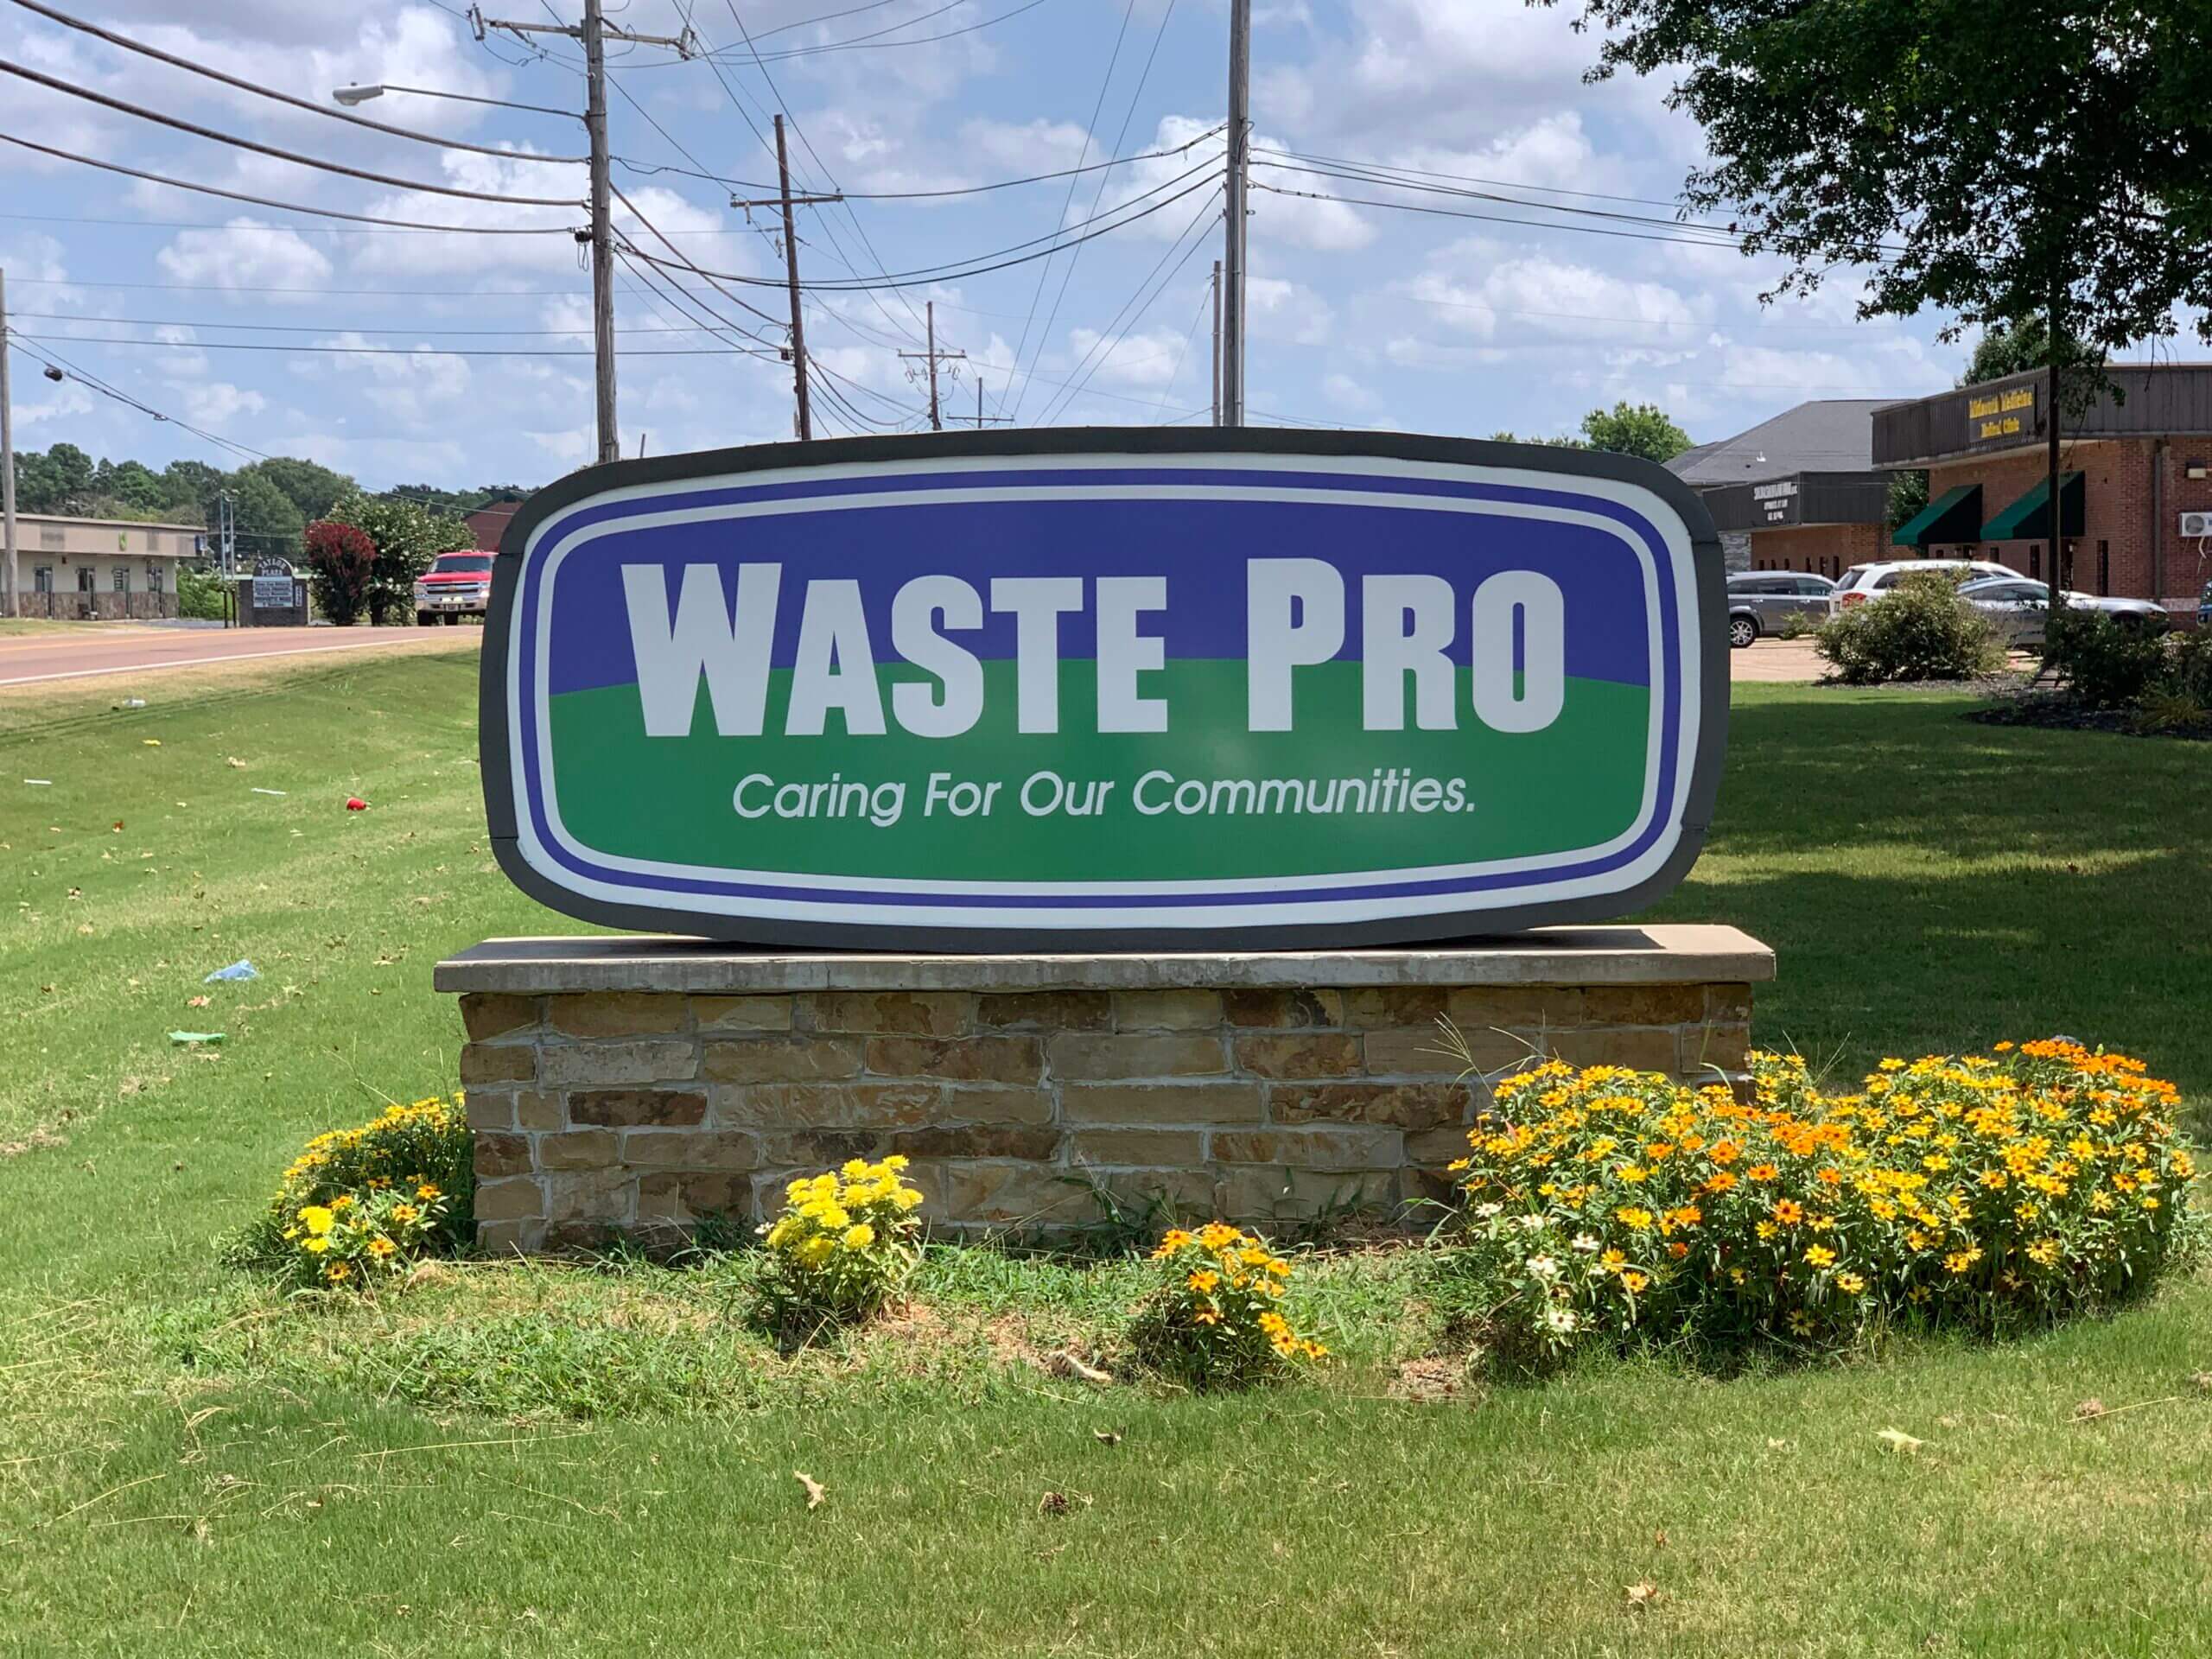 Waste Pro works to catch up on rural collection routes